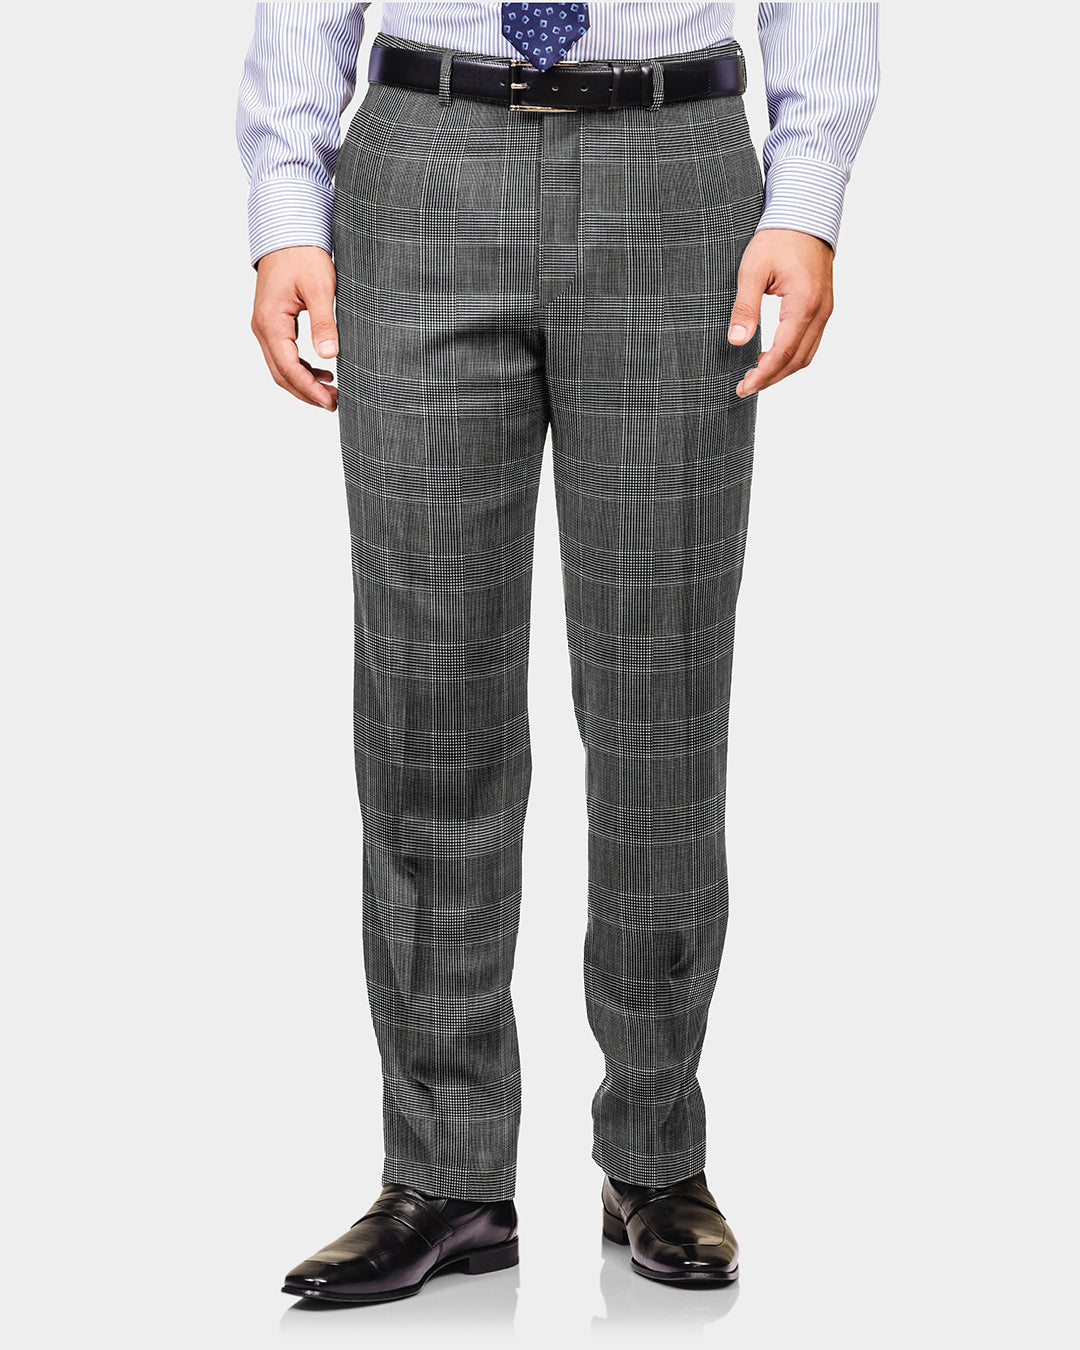 Dugdale Fine Worsted Pant - Grey Prince of Wales with Blue Overcheck